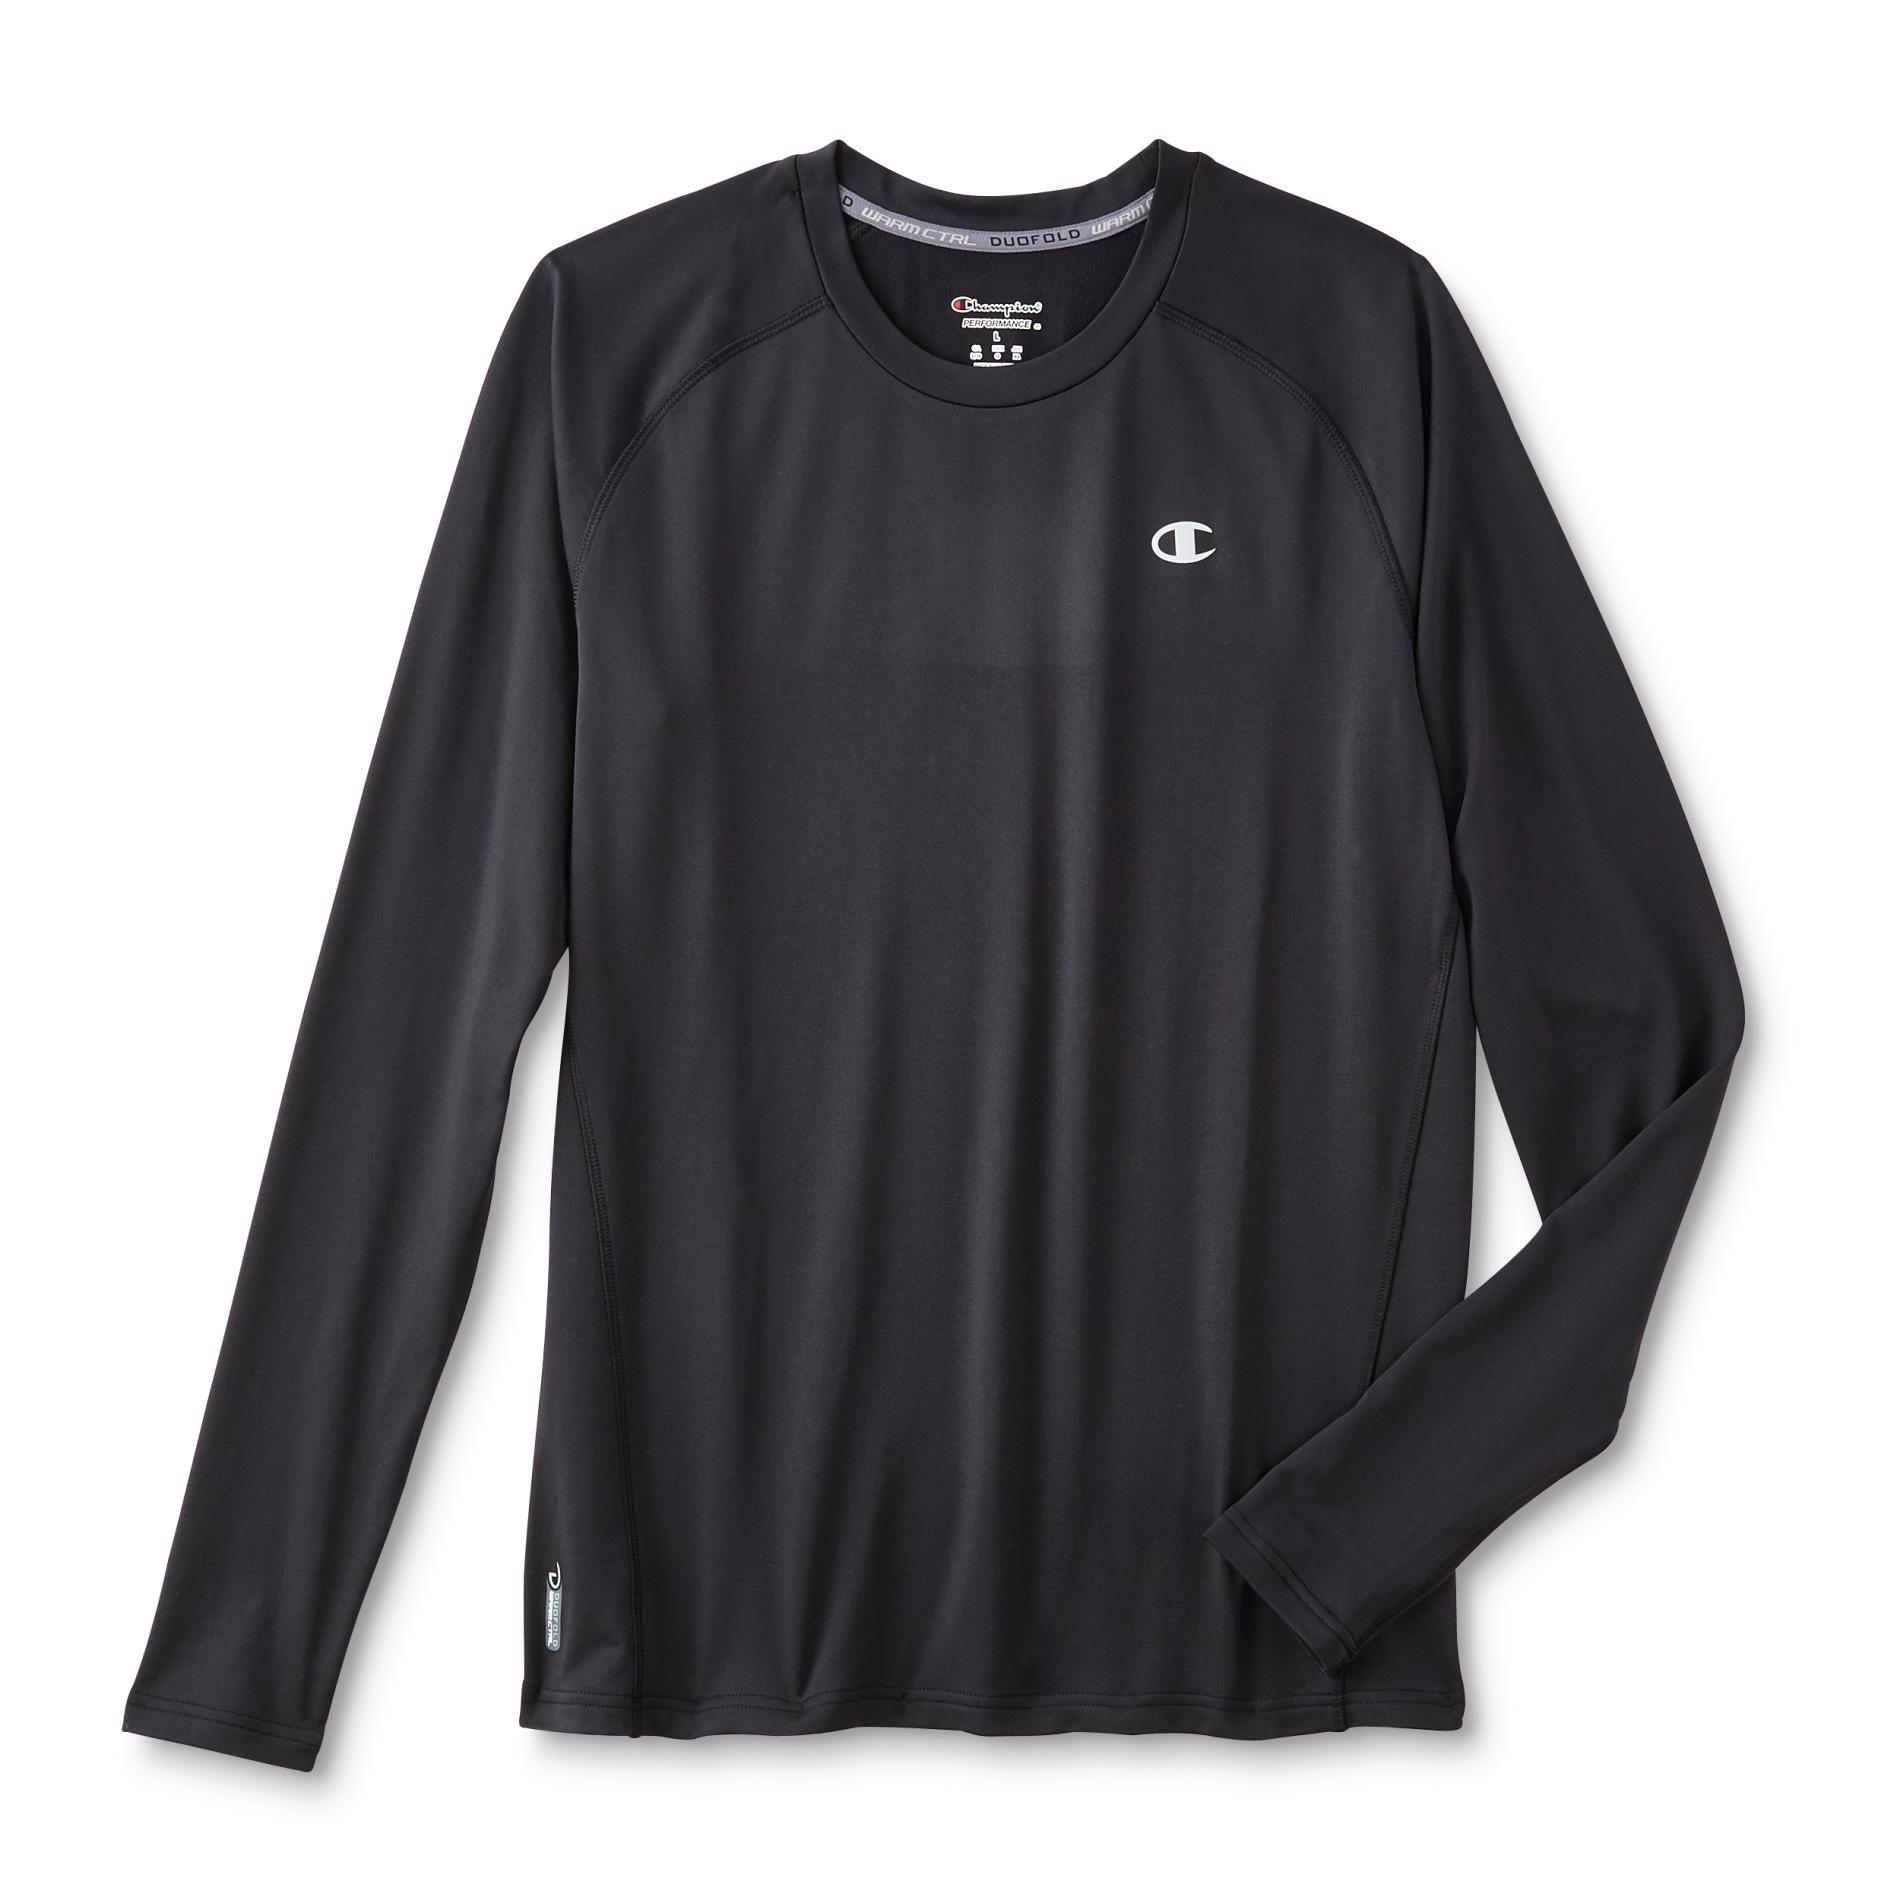 Champion Men's Lined Athletic Shirt